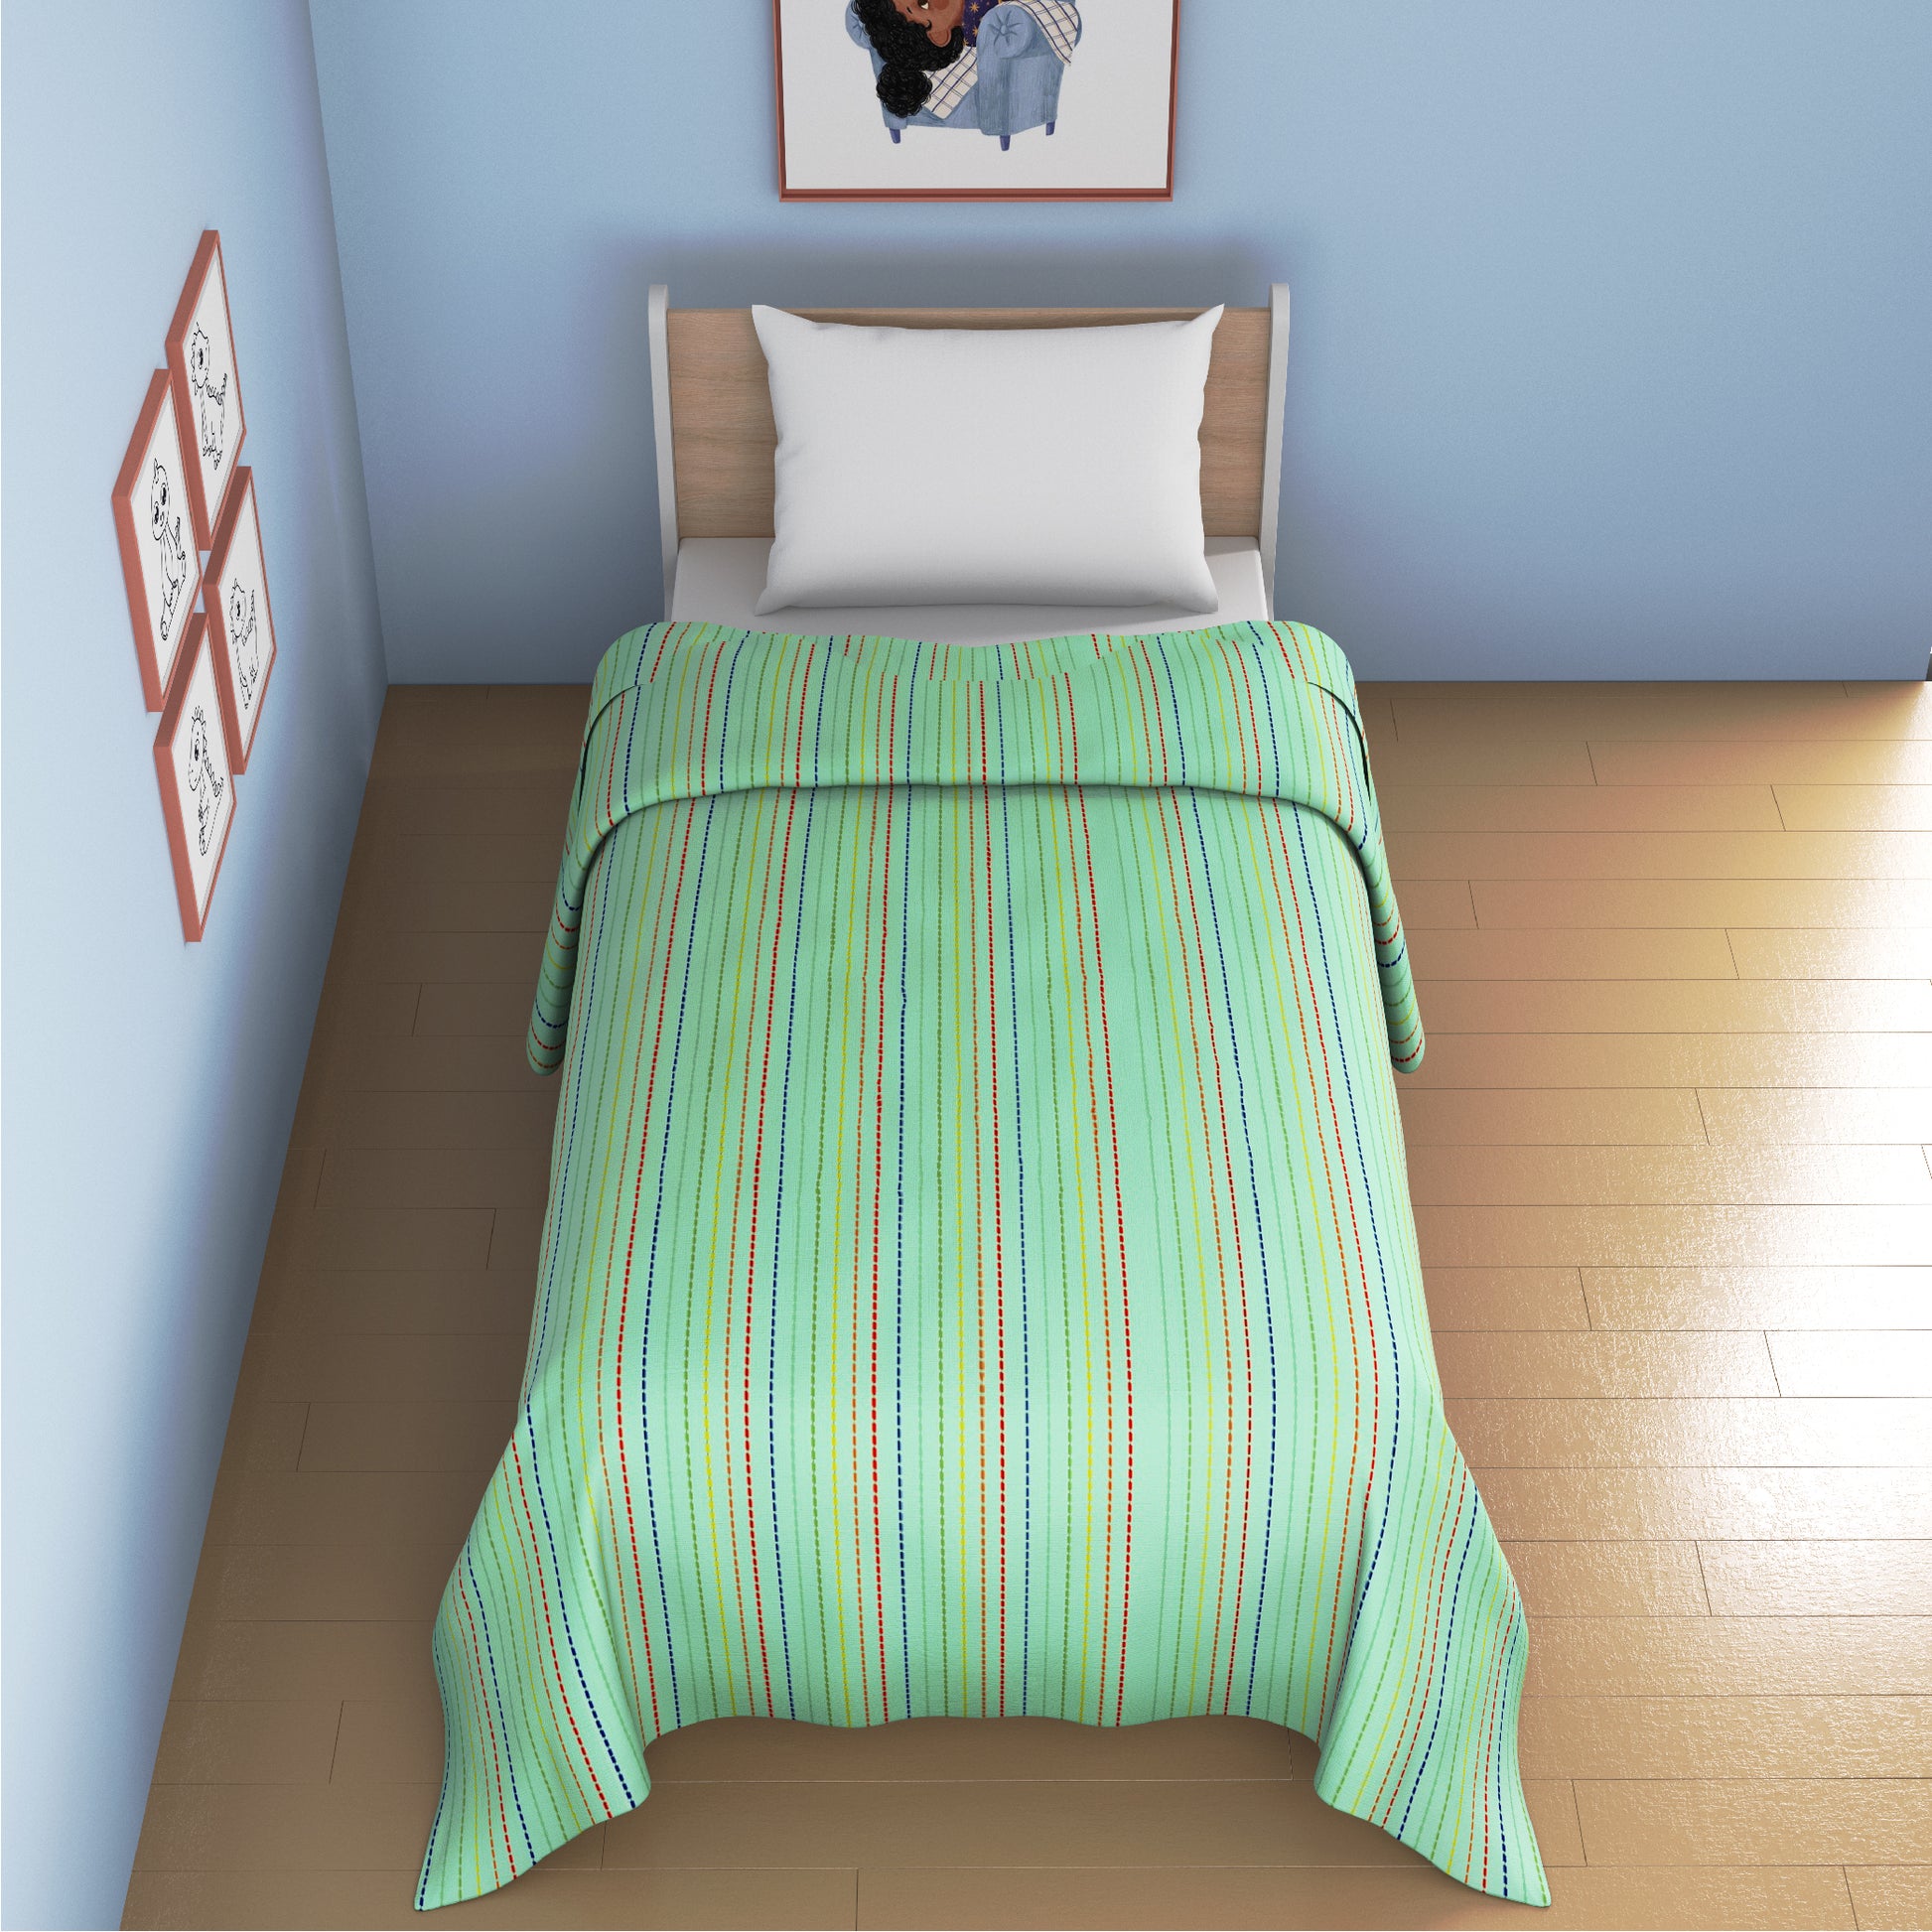 media_gallary Cursive Lines Coverlet Single Bed Size 2